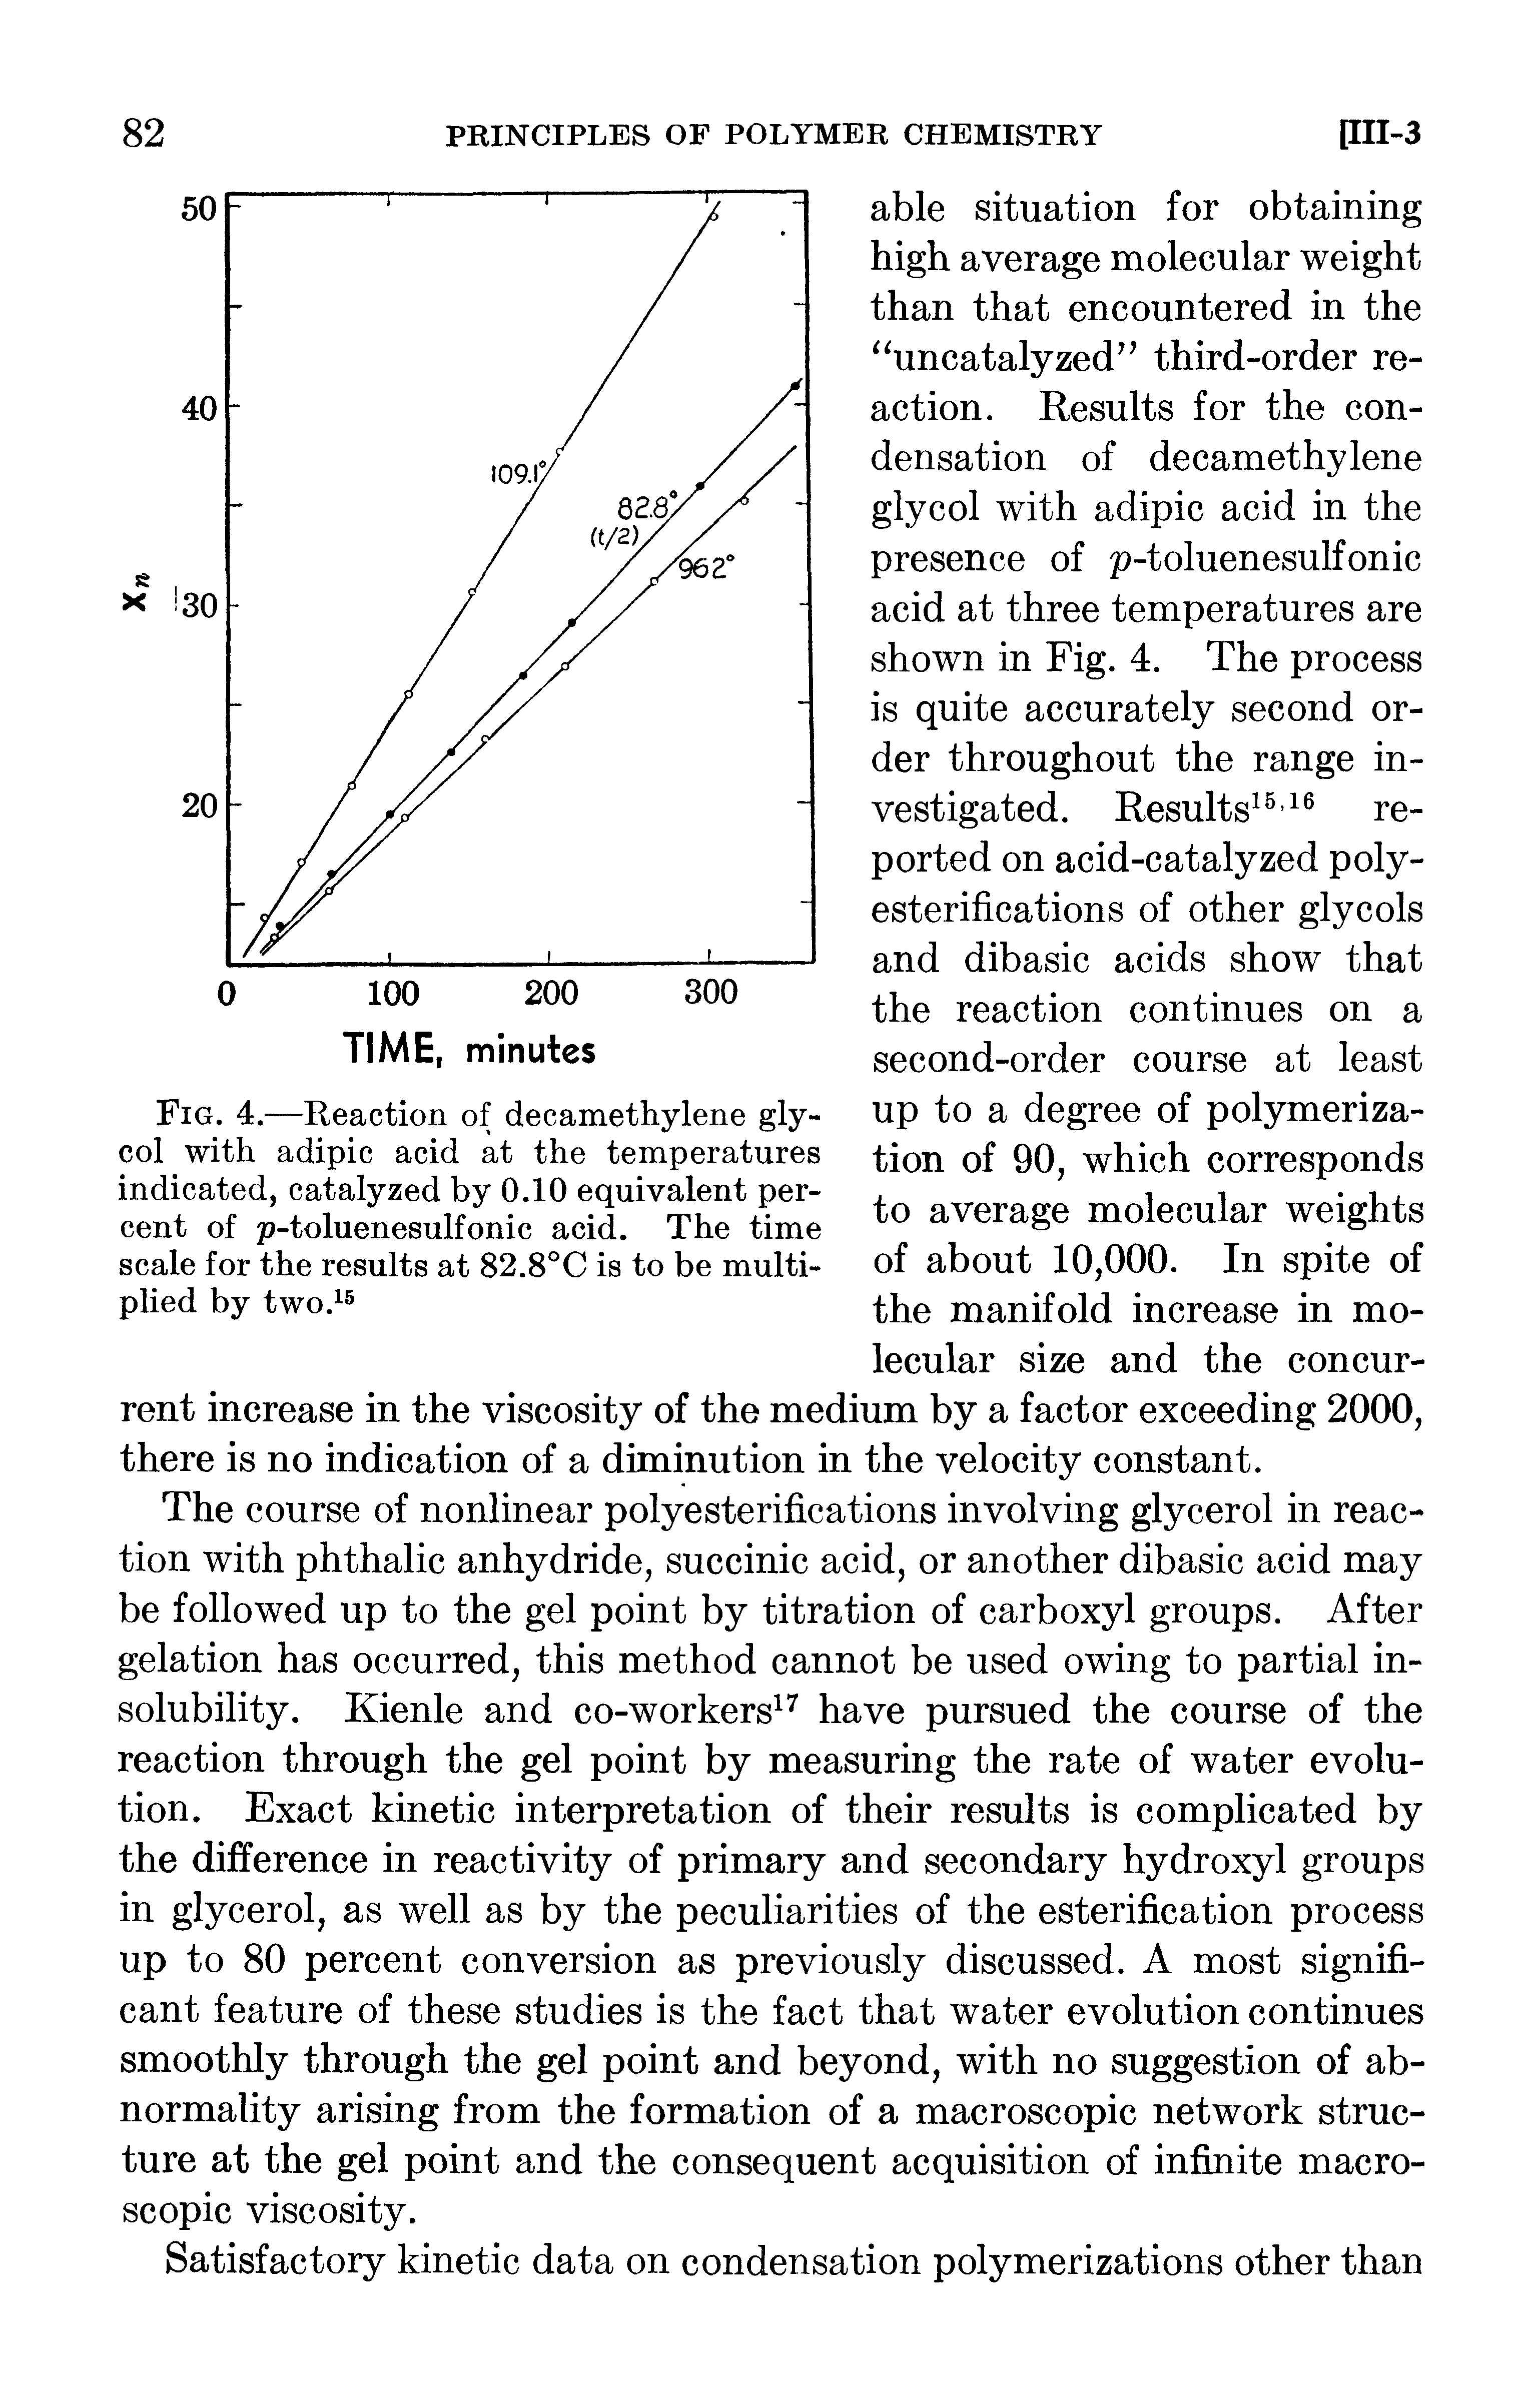 Fig. 4.—Reaction of decamethylene glycol with adipic acid at the temperatures indicated, catalyzed by 0.10 equivalent percent of p-toluenesulfonic acid. The time scale for the results at 82.8°C is to be multiplied by two. ...